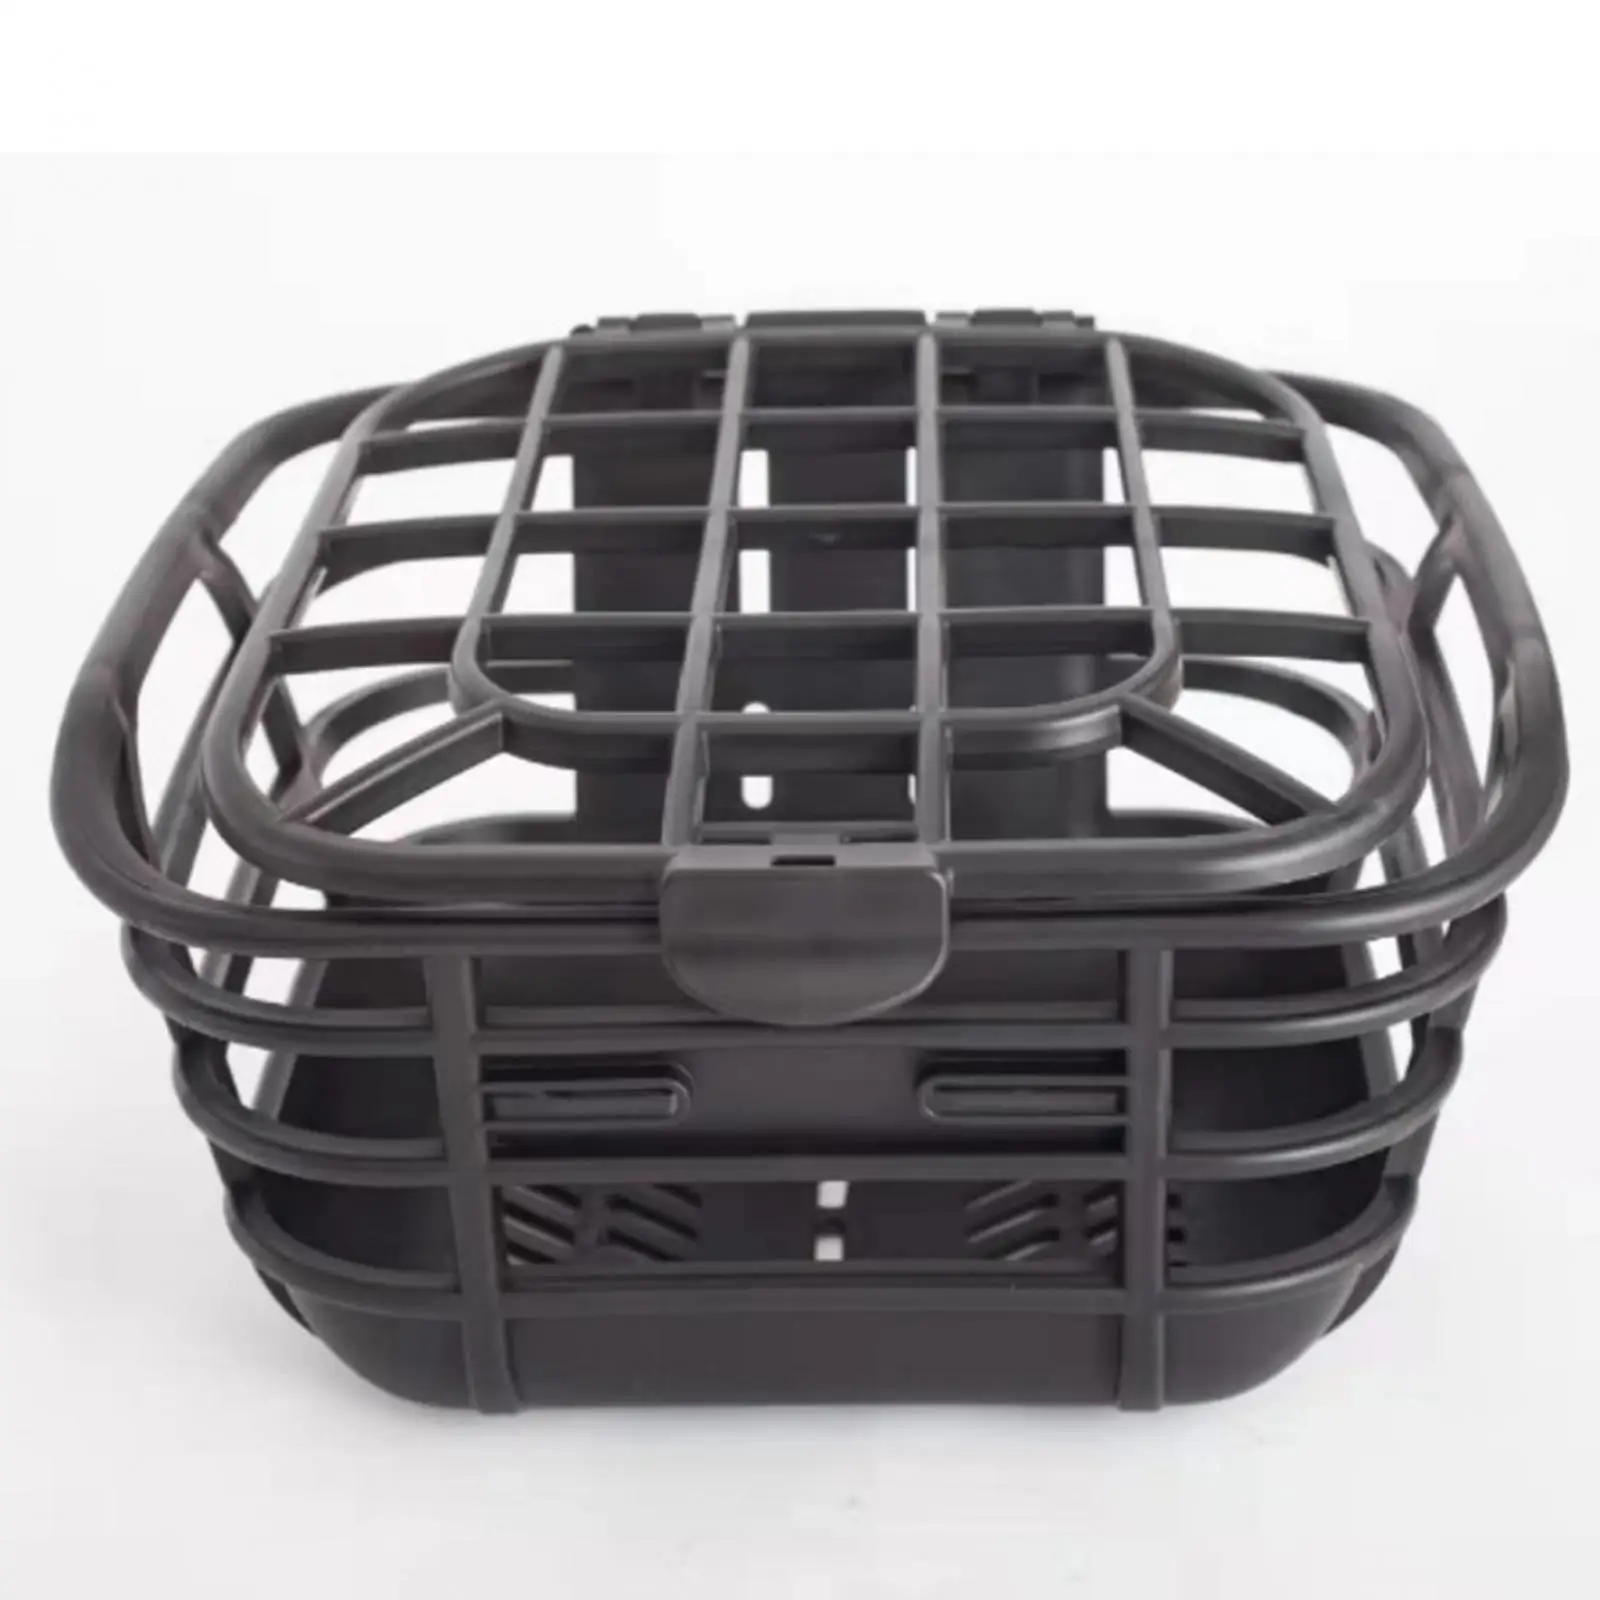 Front Bike Basket Easy to Install Pet Carrier Bike Handlebar Basket with Cover for Kids Bikes Road Bikes Electric Bikes Riding